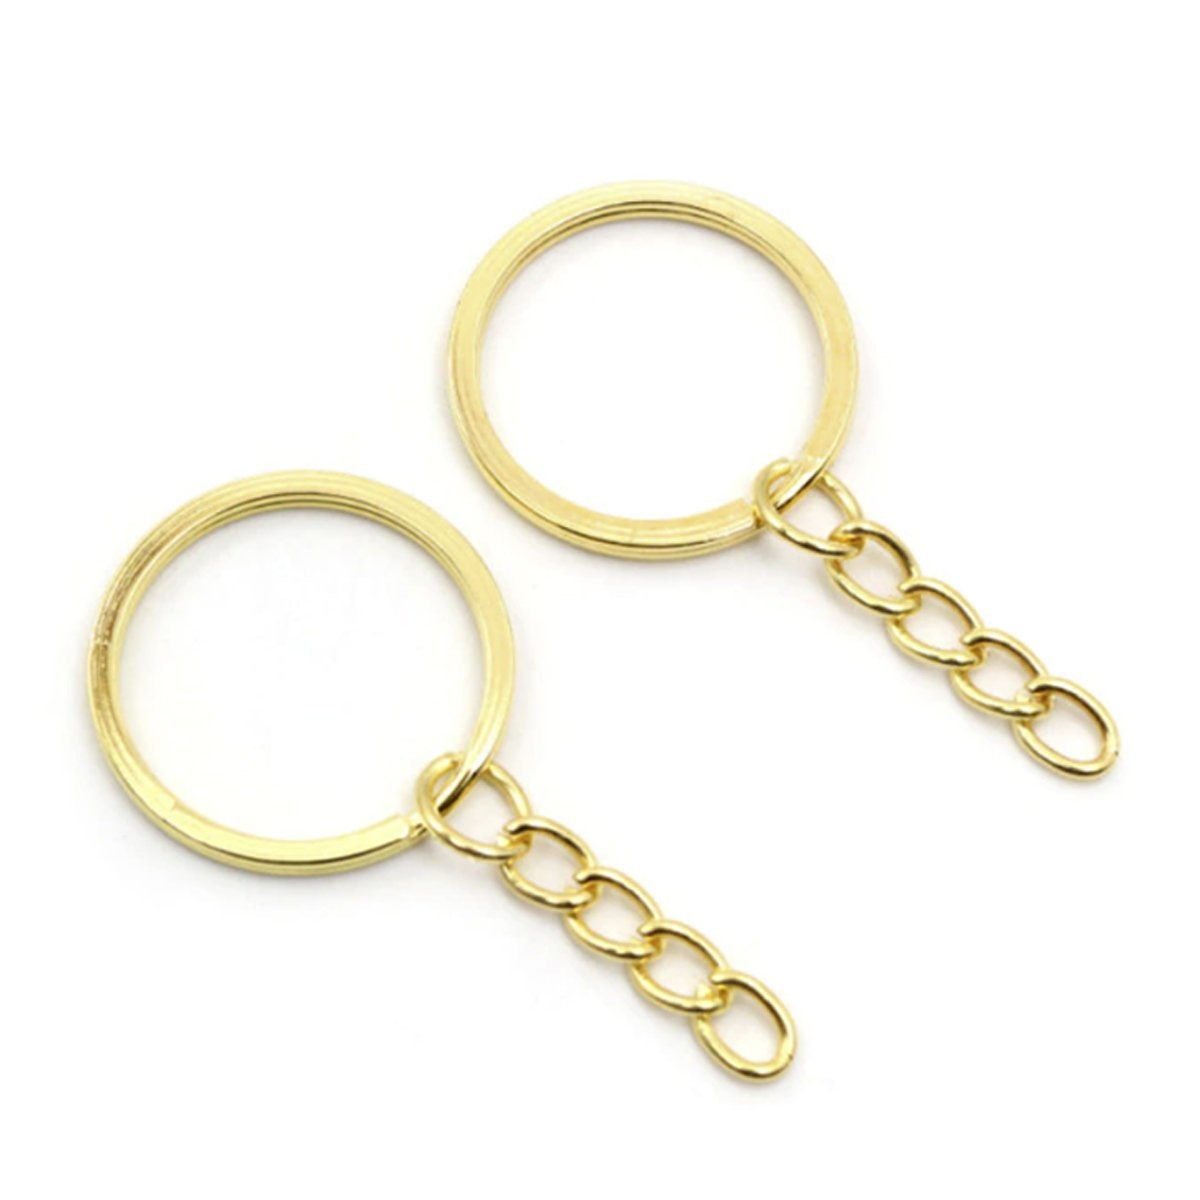 100Pcs 25Mm Rose Gold Ancient Keyring Keychain Split Ring Chain Key Rings Chains